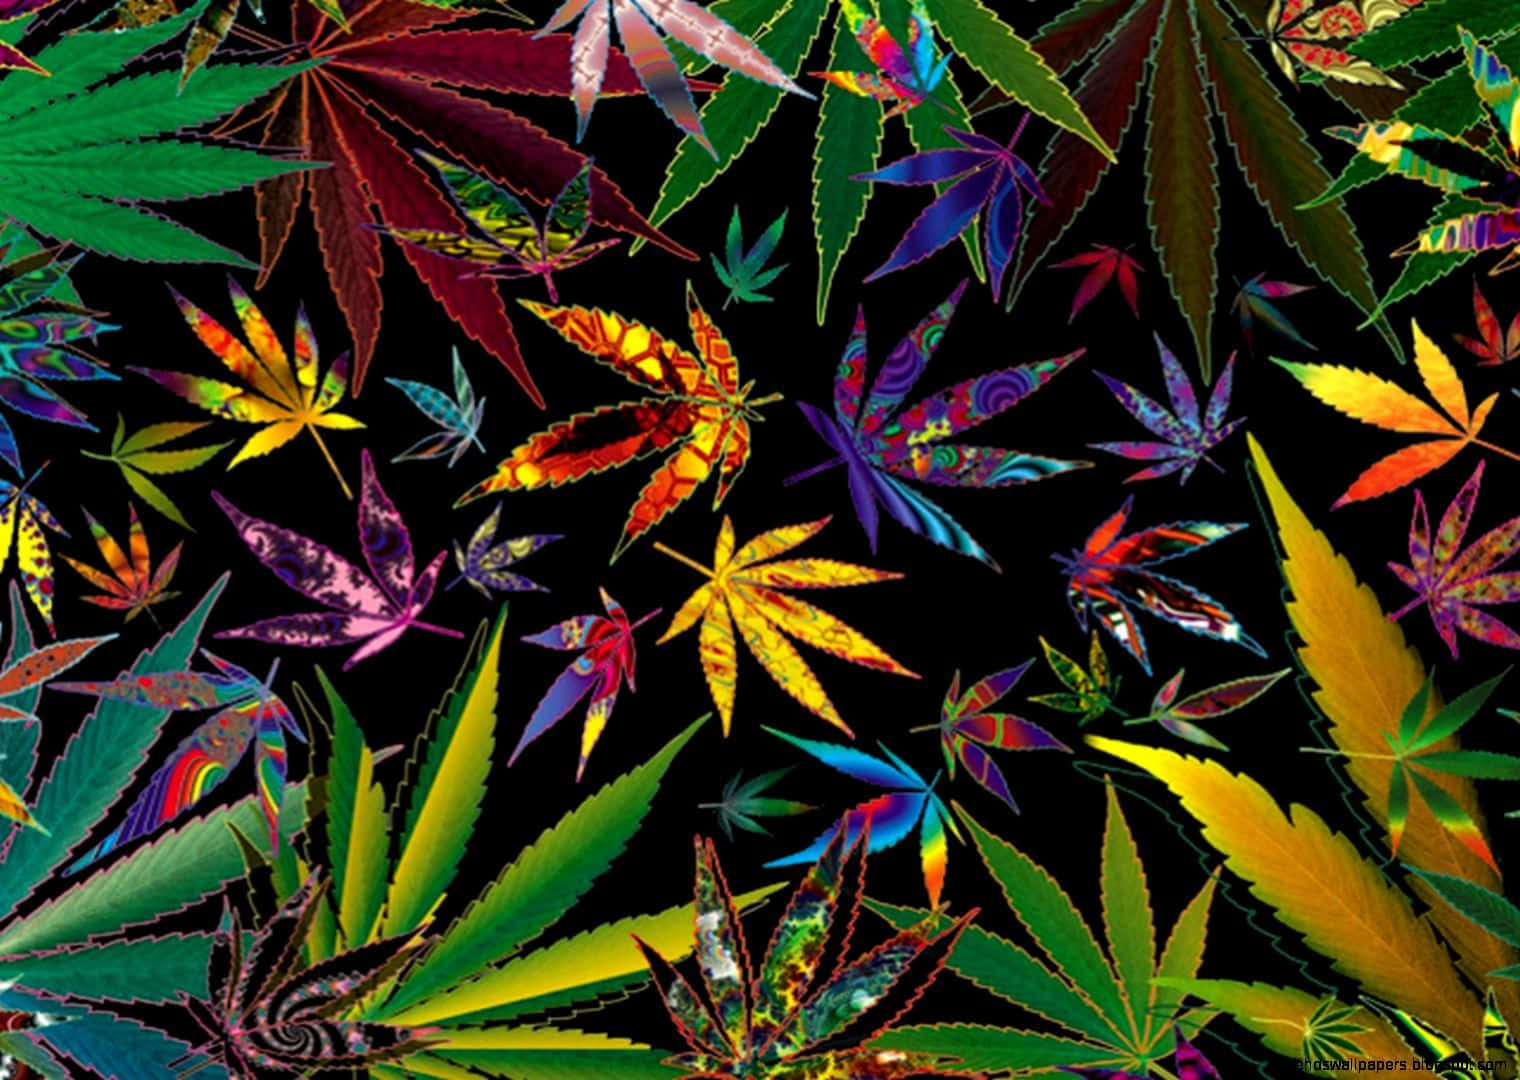 Stop looking, we've already got the perfect phone for all the stoners out there: The Stoner Iphone. Wallpaper